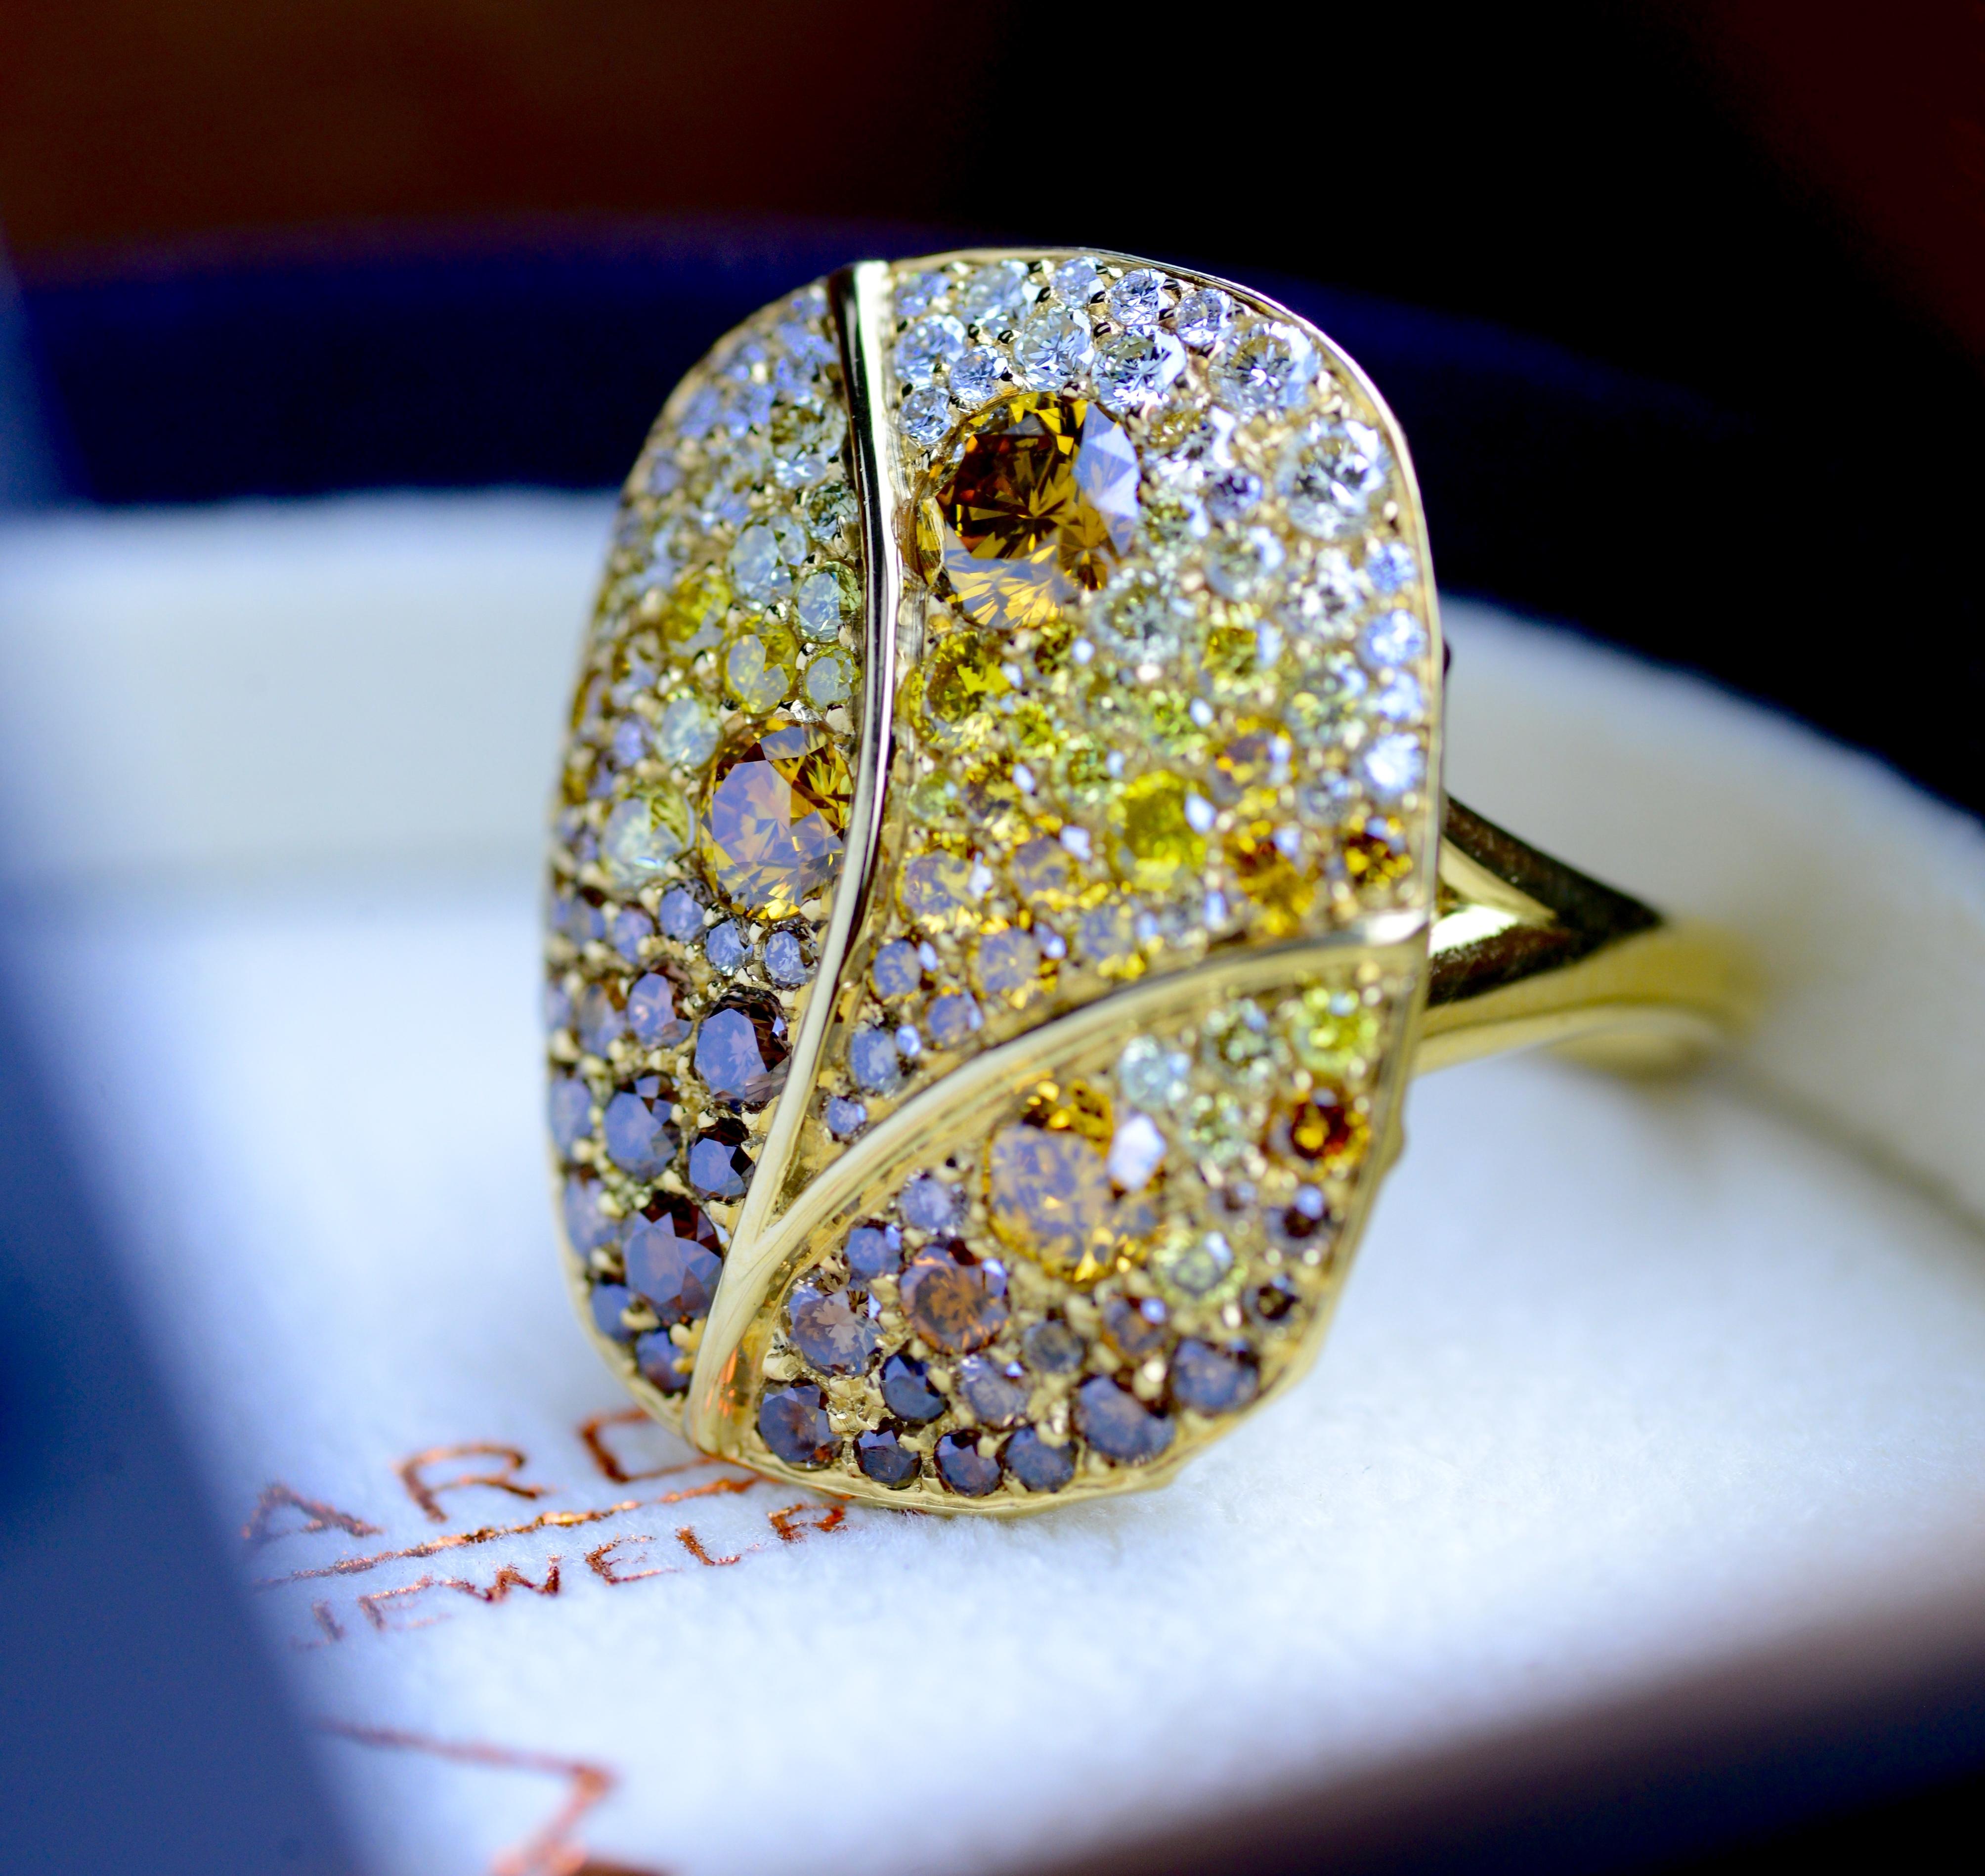 Leaf Motif Diamond Ring with graduating Brown, Orange, Yellow and White Fancy Colored VVS-SI1 Diamonds, total of 3.80 carats. Total weight is 9.1 grams. Finger size is 6.5. Set in 18K Yellow gold. 

Proudly crafted by SIMON ARDEM artisans in New